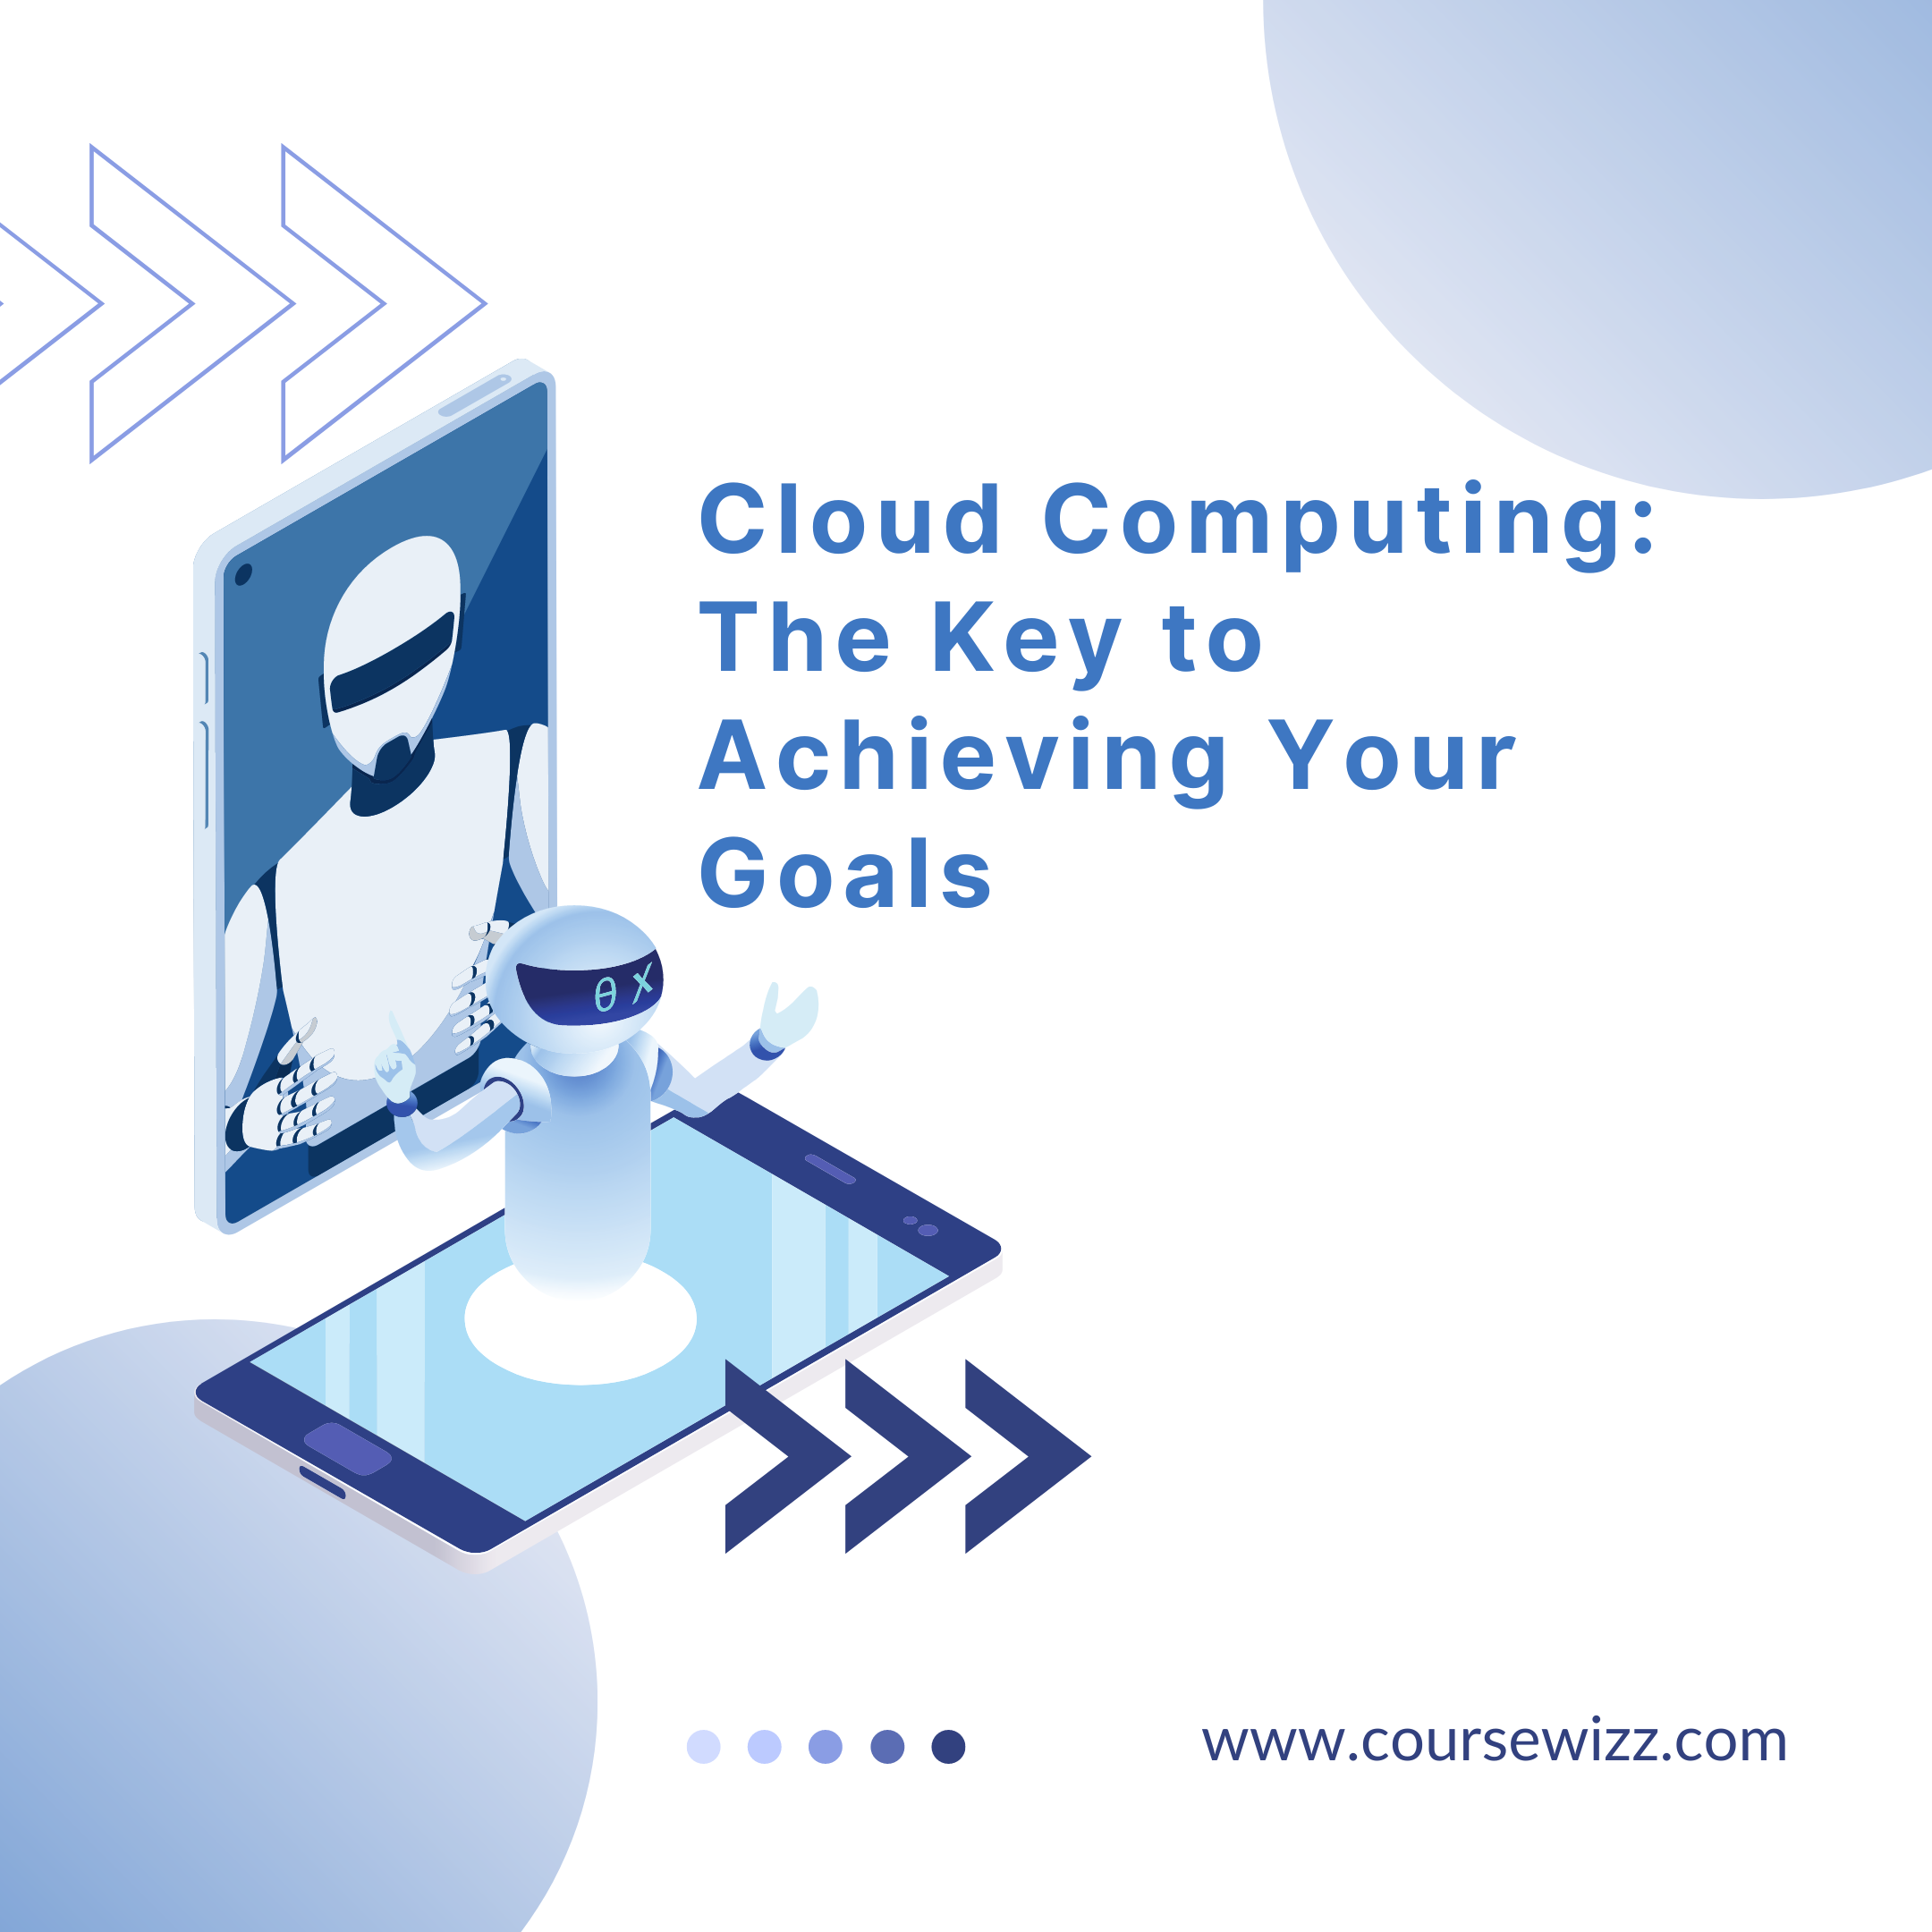 Cloud Computing: The Key to Achieving Your Goals